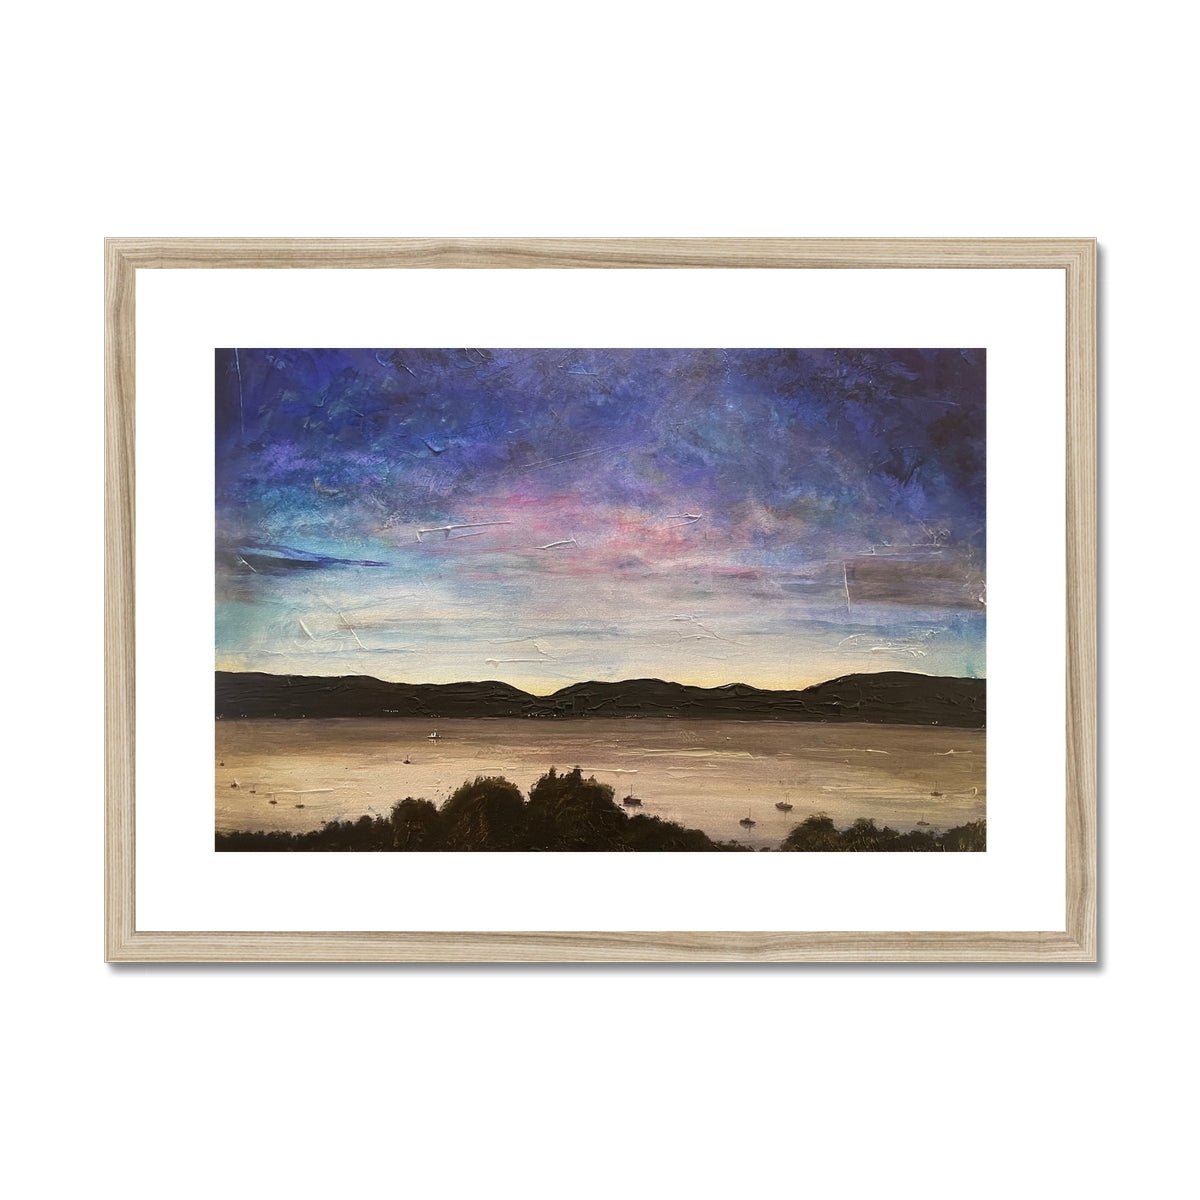 River Clyde Twilight Painting | Framed & Mounted Prints From Scotland-Framed & Mounted Prints-River Clyde Art Gallery-A2 Landscape-Natural Frame-Paintings, Prints, Homeware, Art Gifts From Scotland By Scottish Artist Kevin Hunter